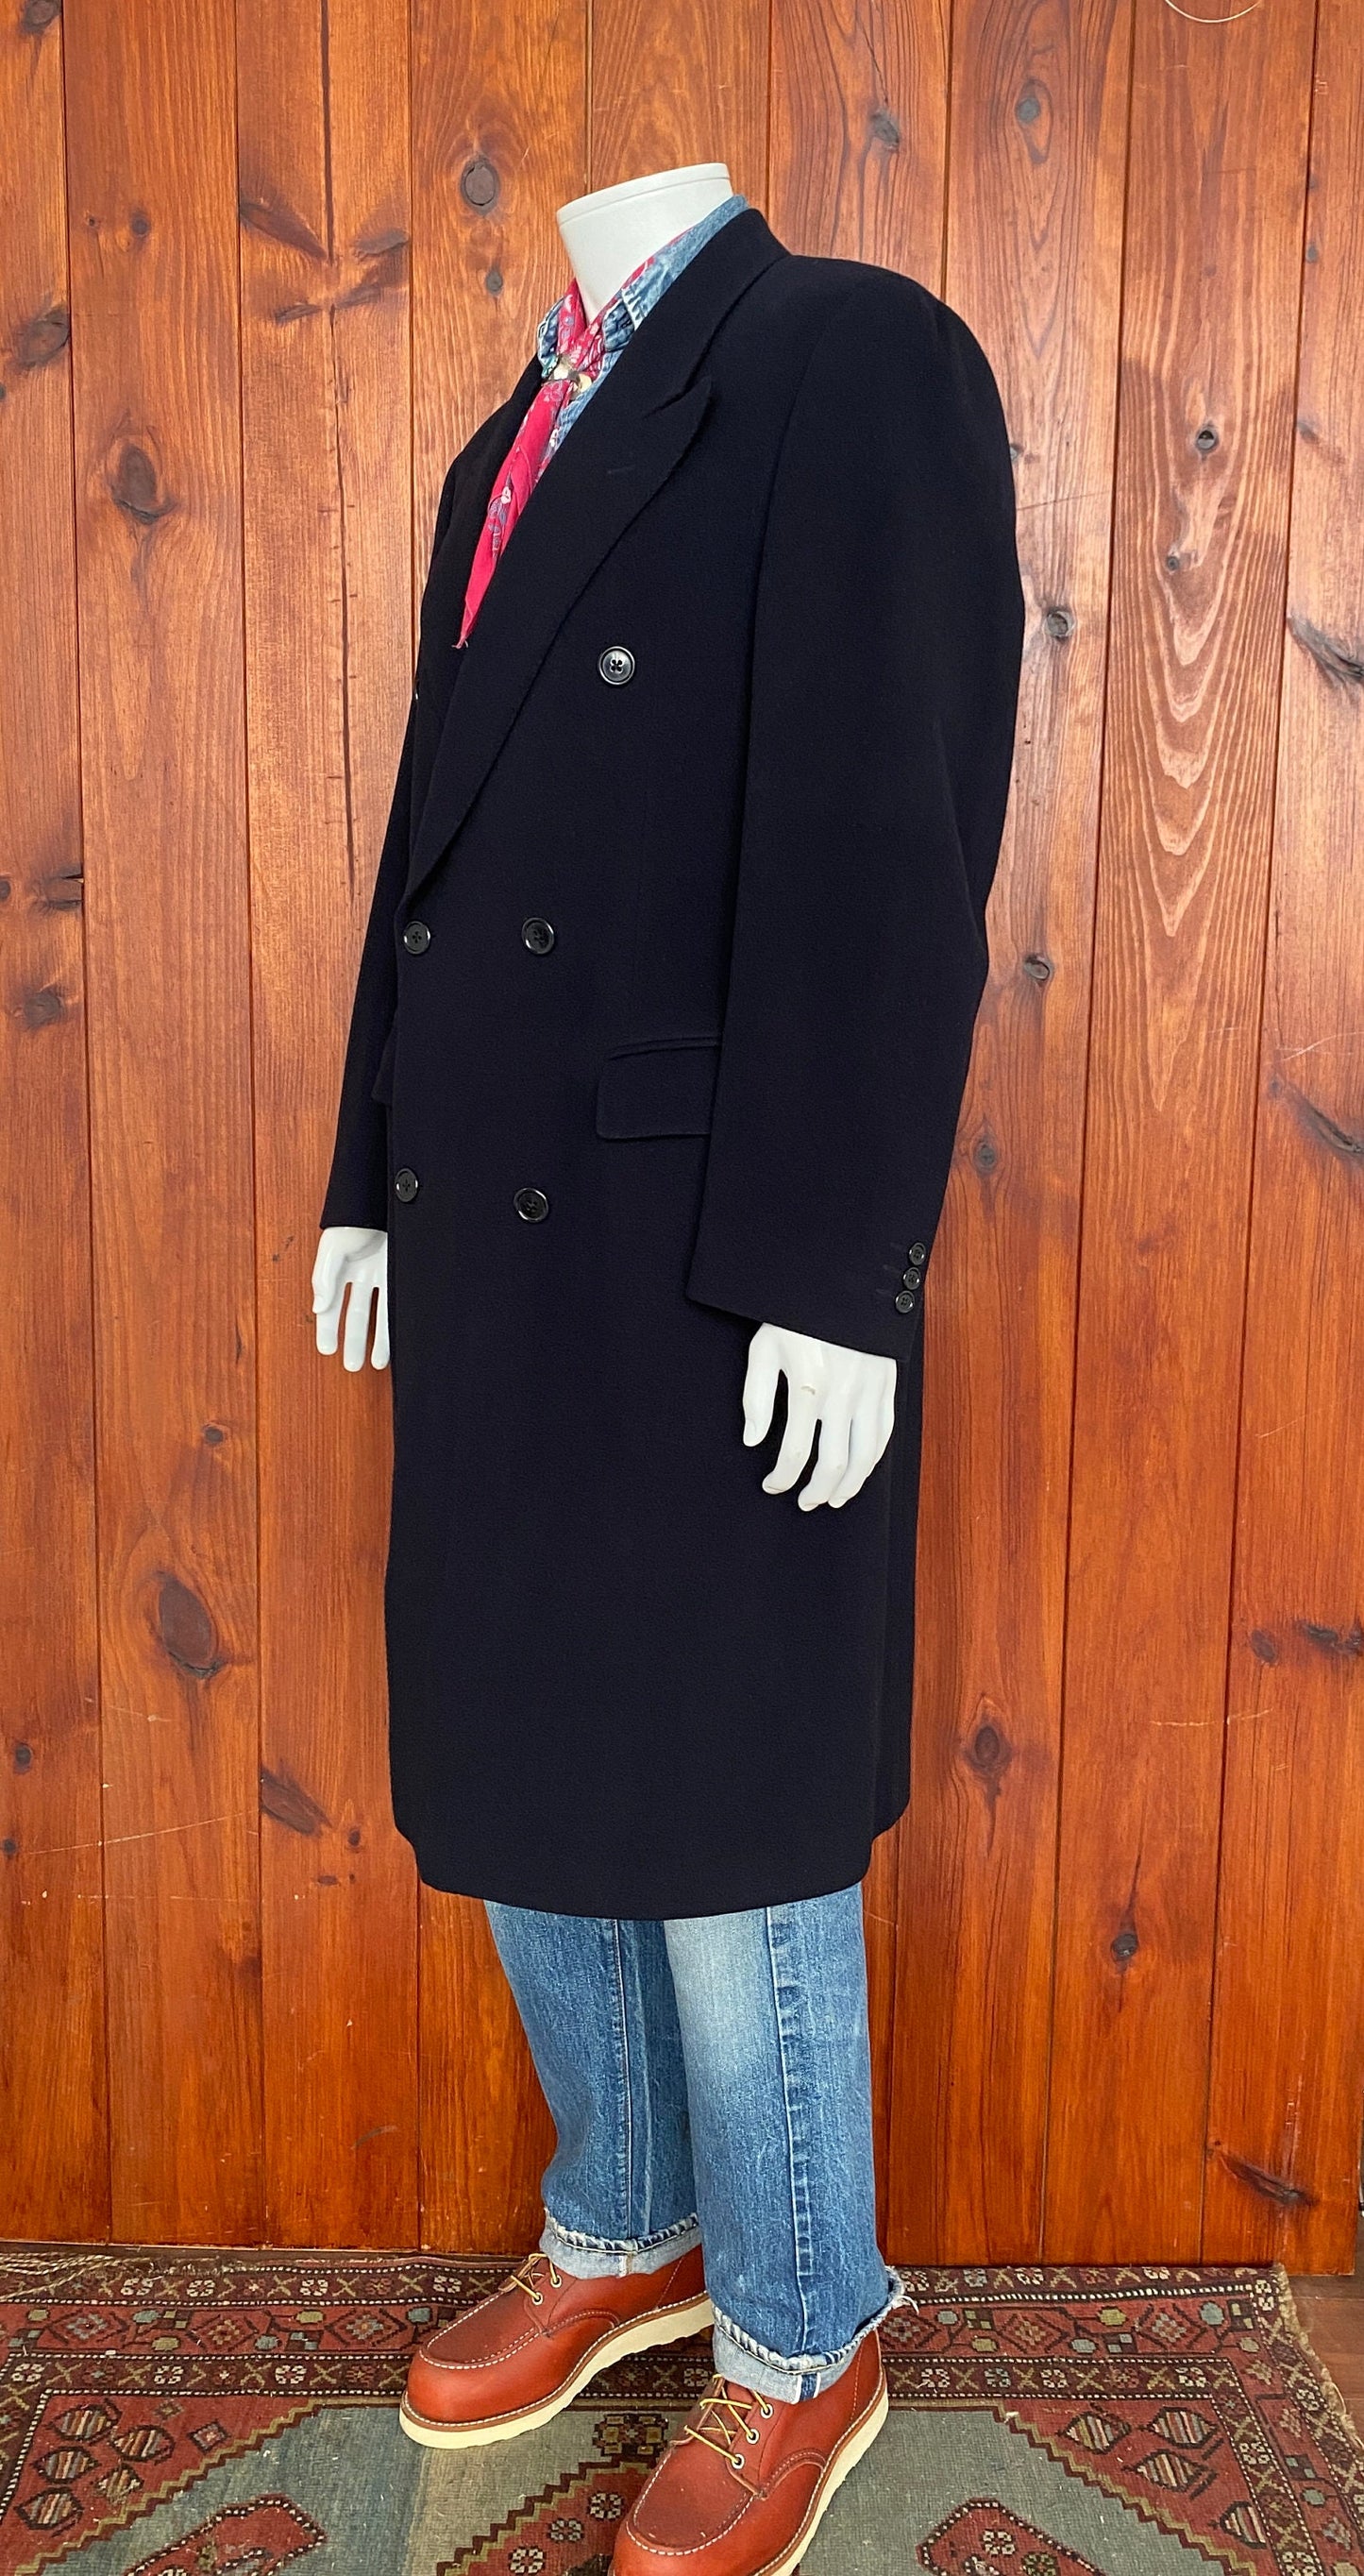 Vintage Burberrys Cashmere Double-Breasted Overcoat - Size 52 EU